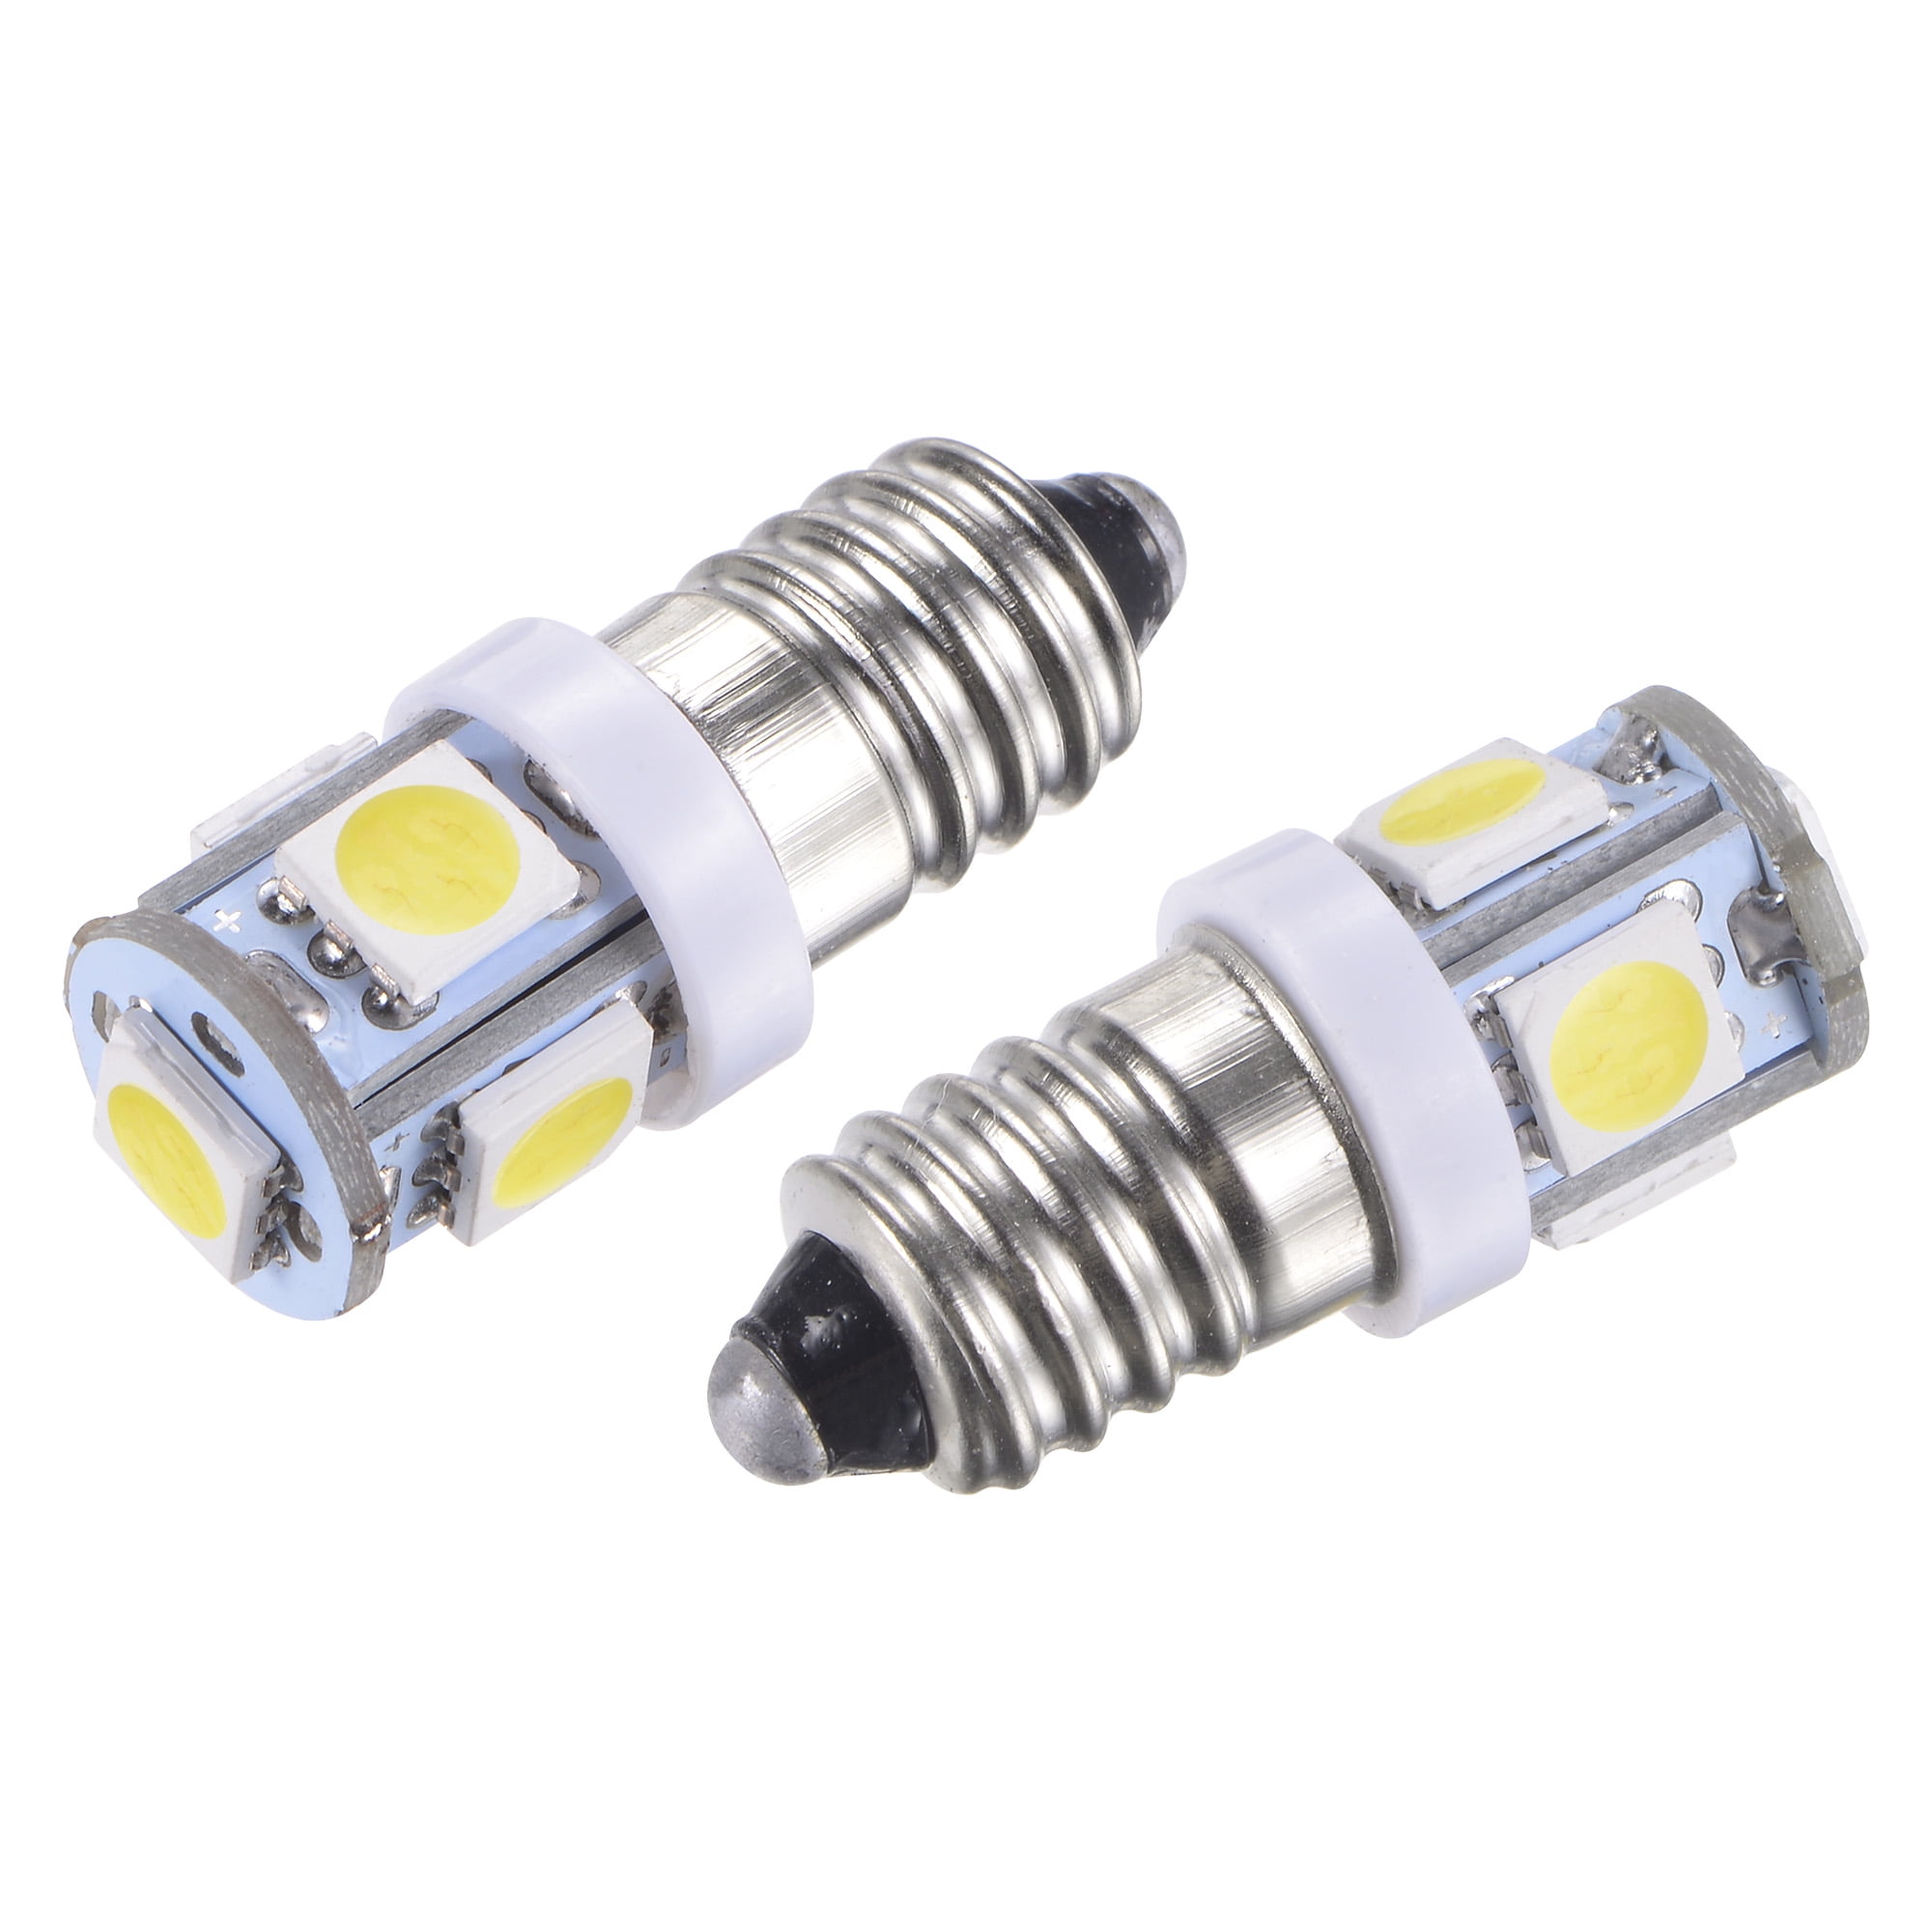 5-Surface Mounted Devices 12V 1W LED Bulbs Lights White 4 Count - Walmart.com